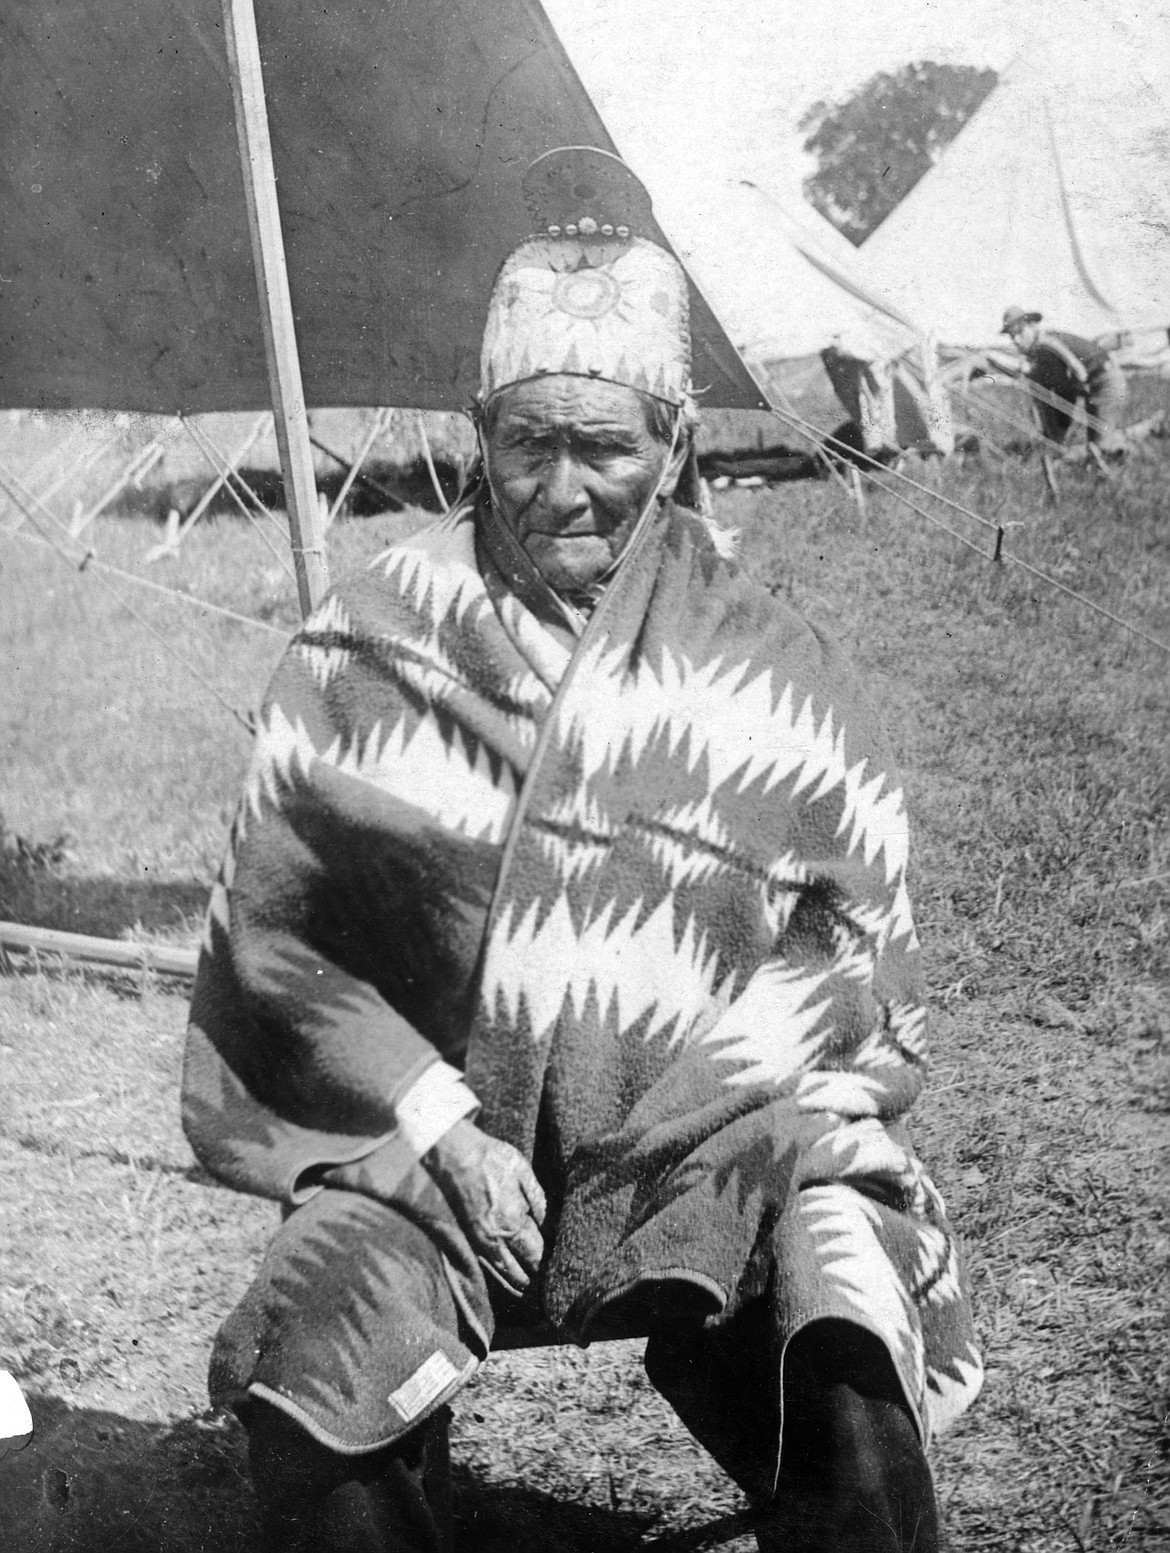 Geronimo as a U.S. prisoner in 1905 is buried at Fort Sill, Okla.